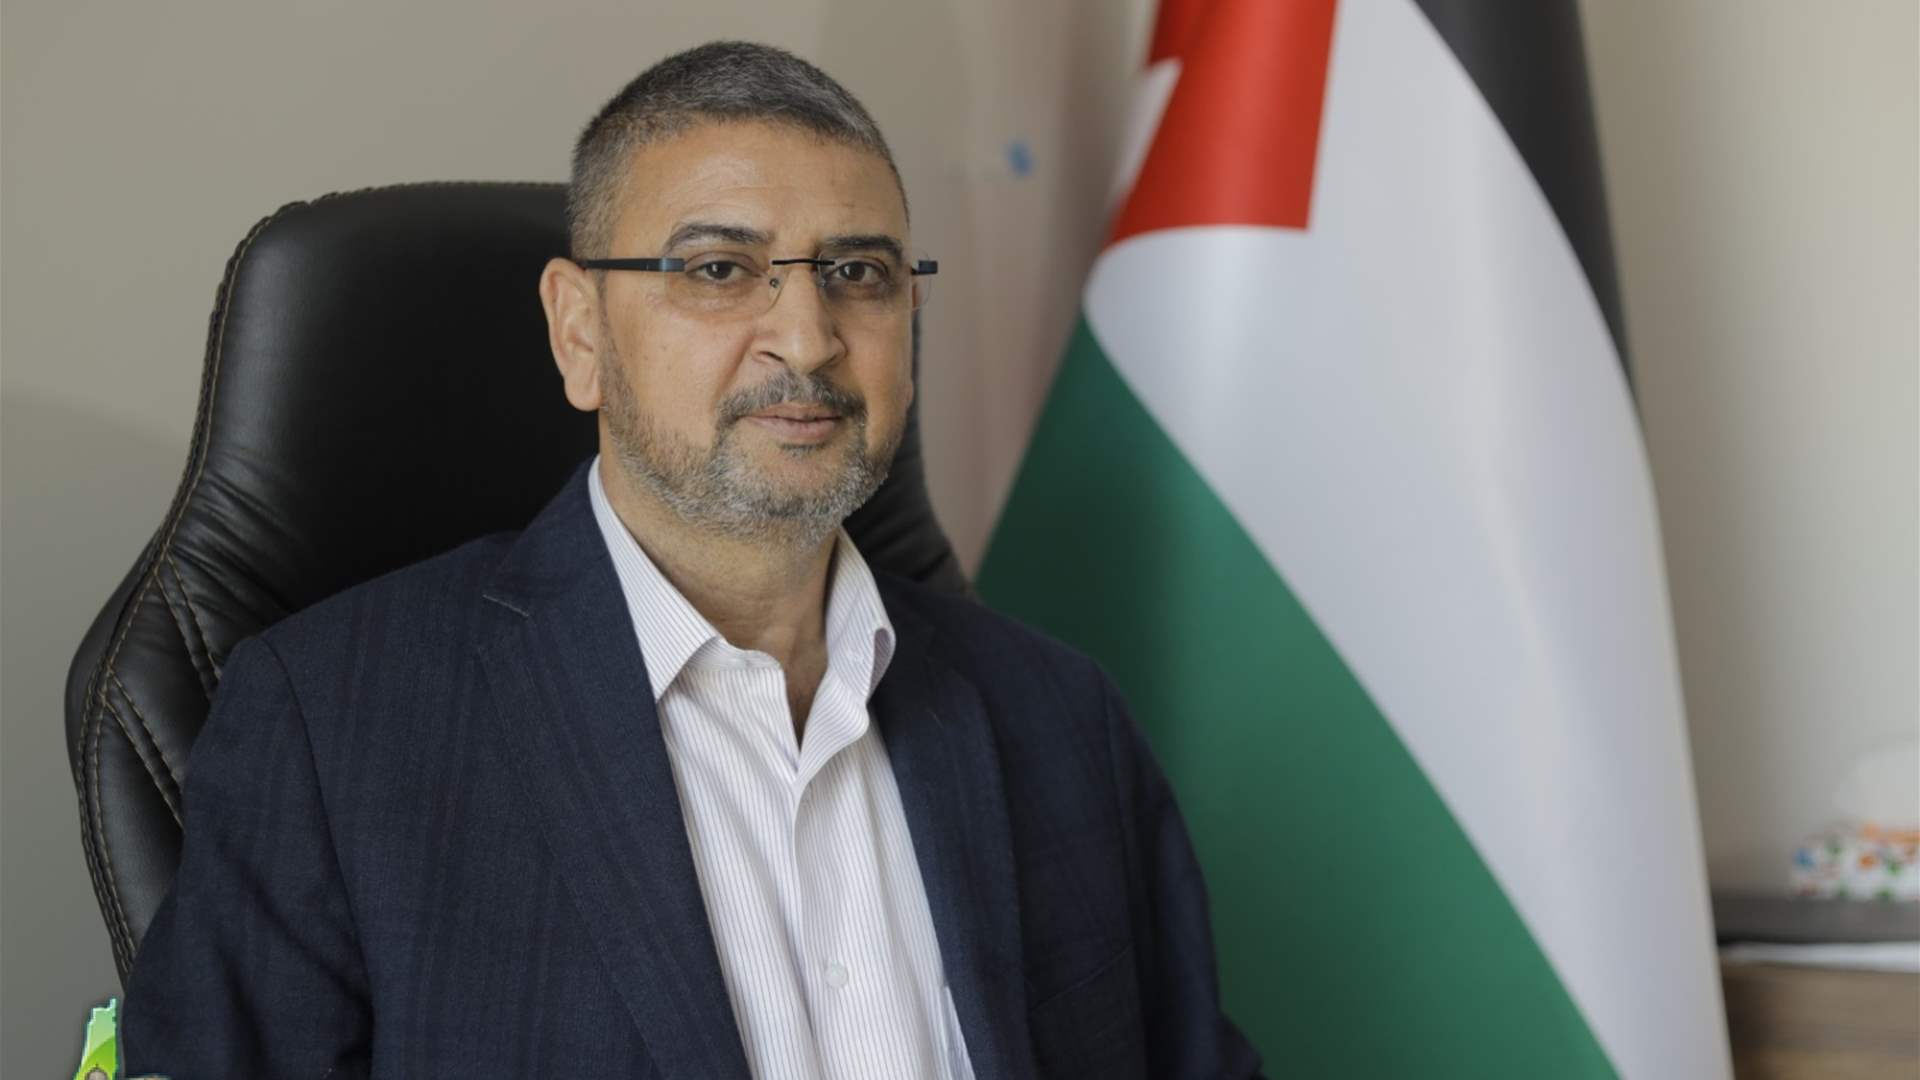 Hamas official: Blinken&#39;s statements about a ceasefire are an attempt to pressure the movement